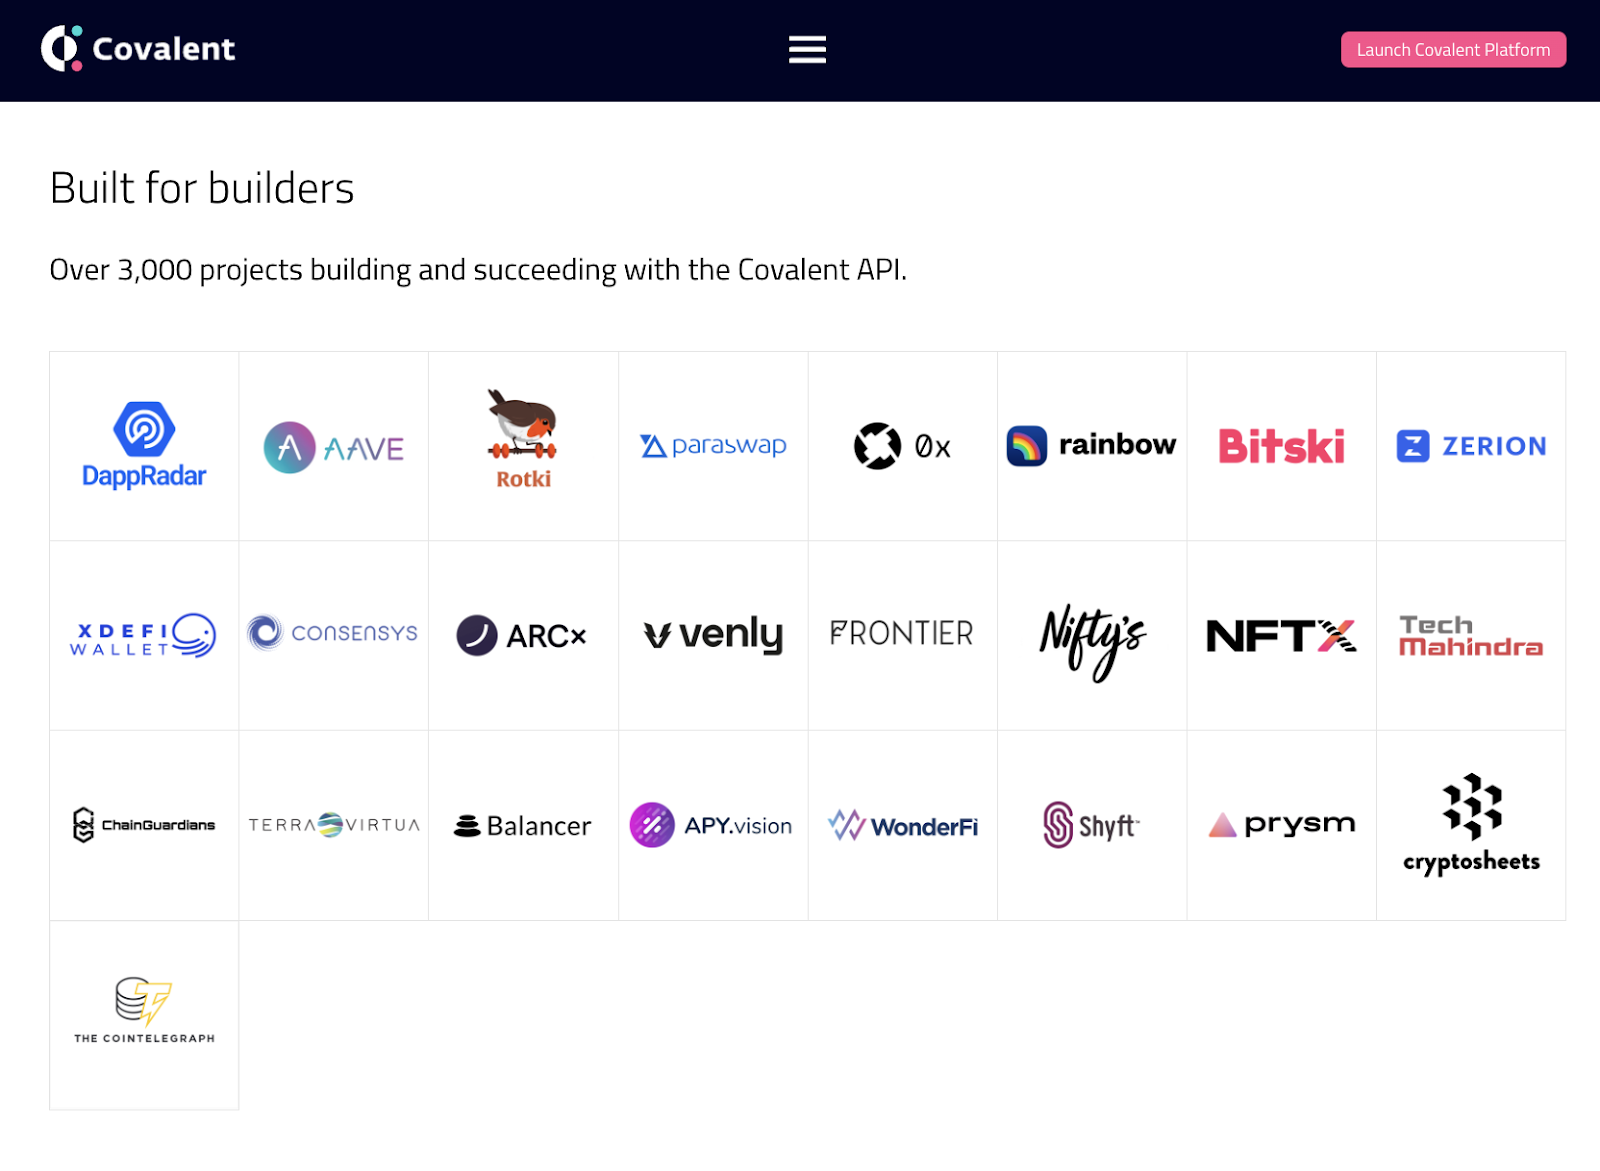 A list of projects using Covalent API, including DappRadar, AAVE, Rotki, etc.